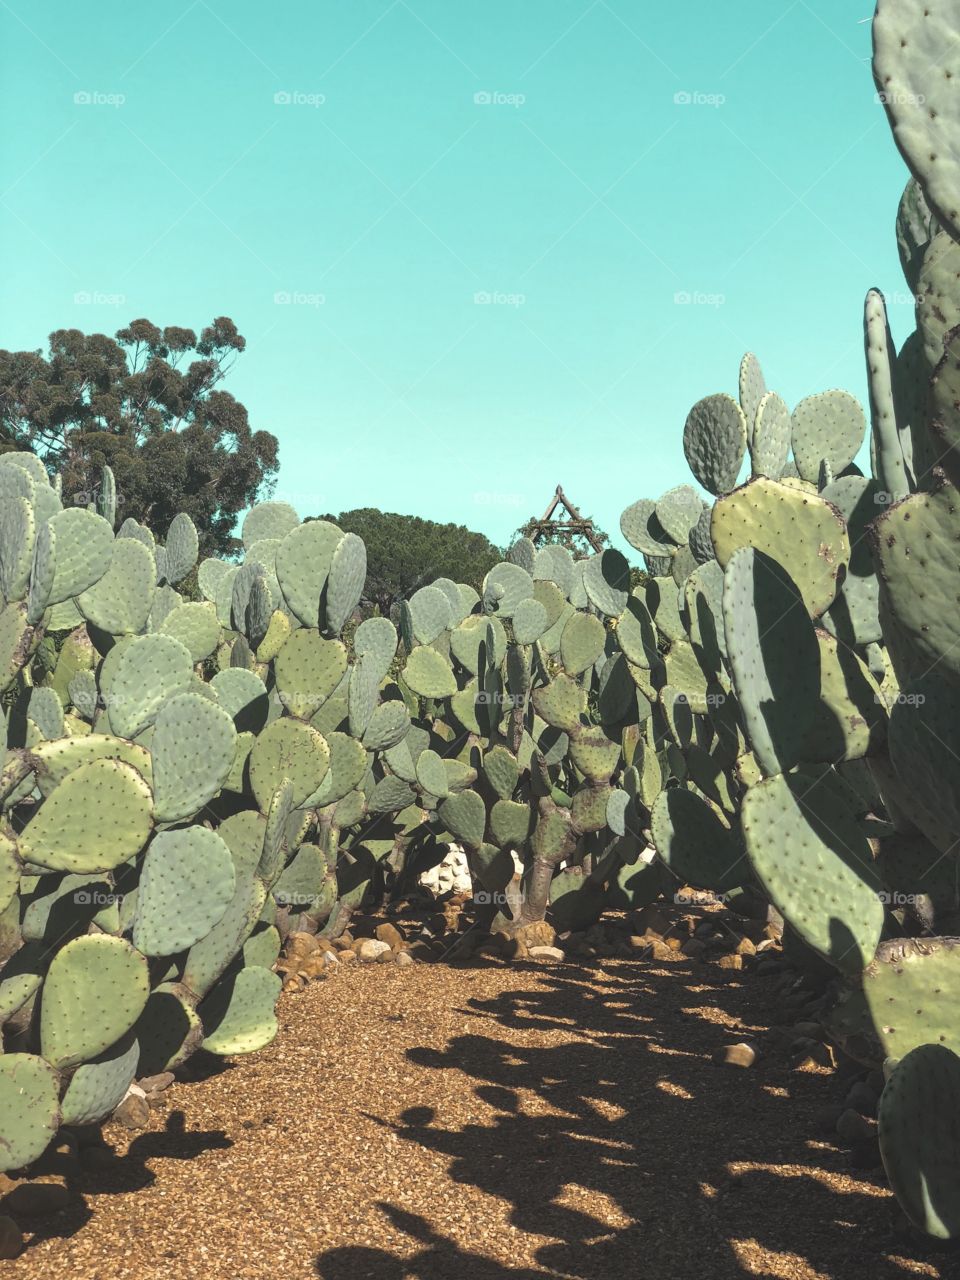 Wondering in a cactus garden on a perfect day 